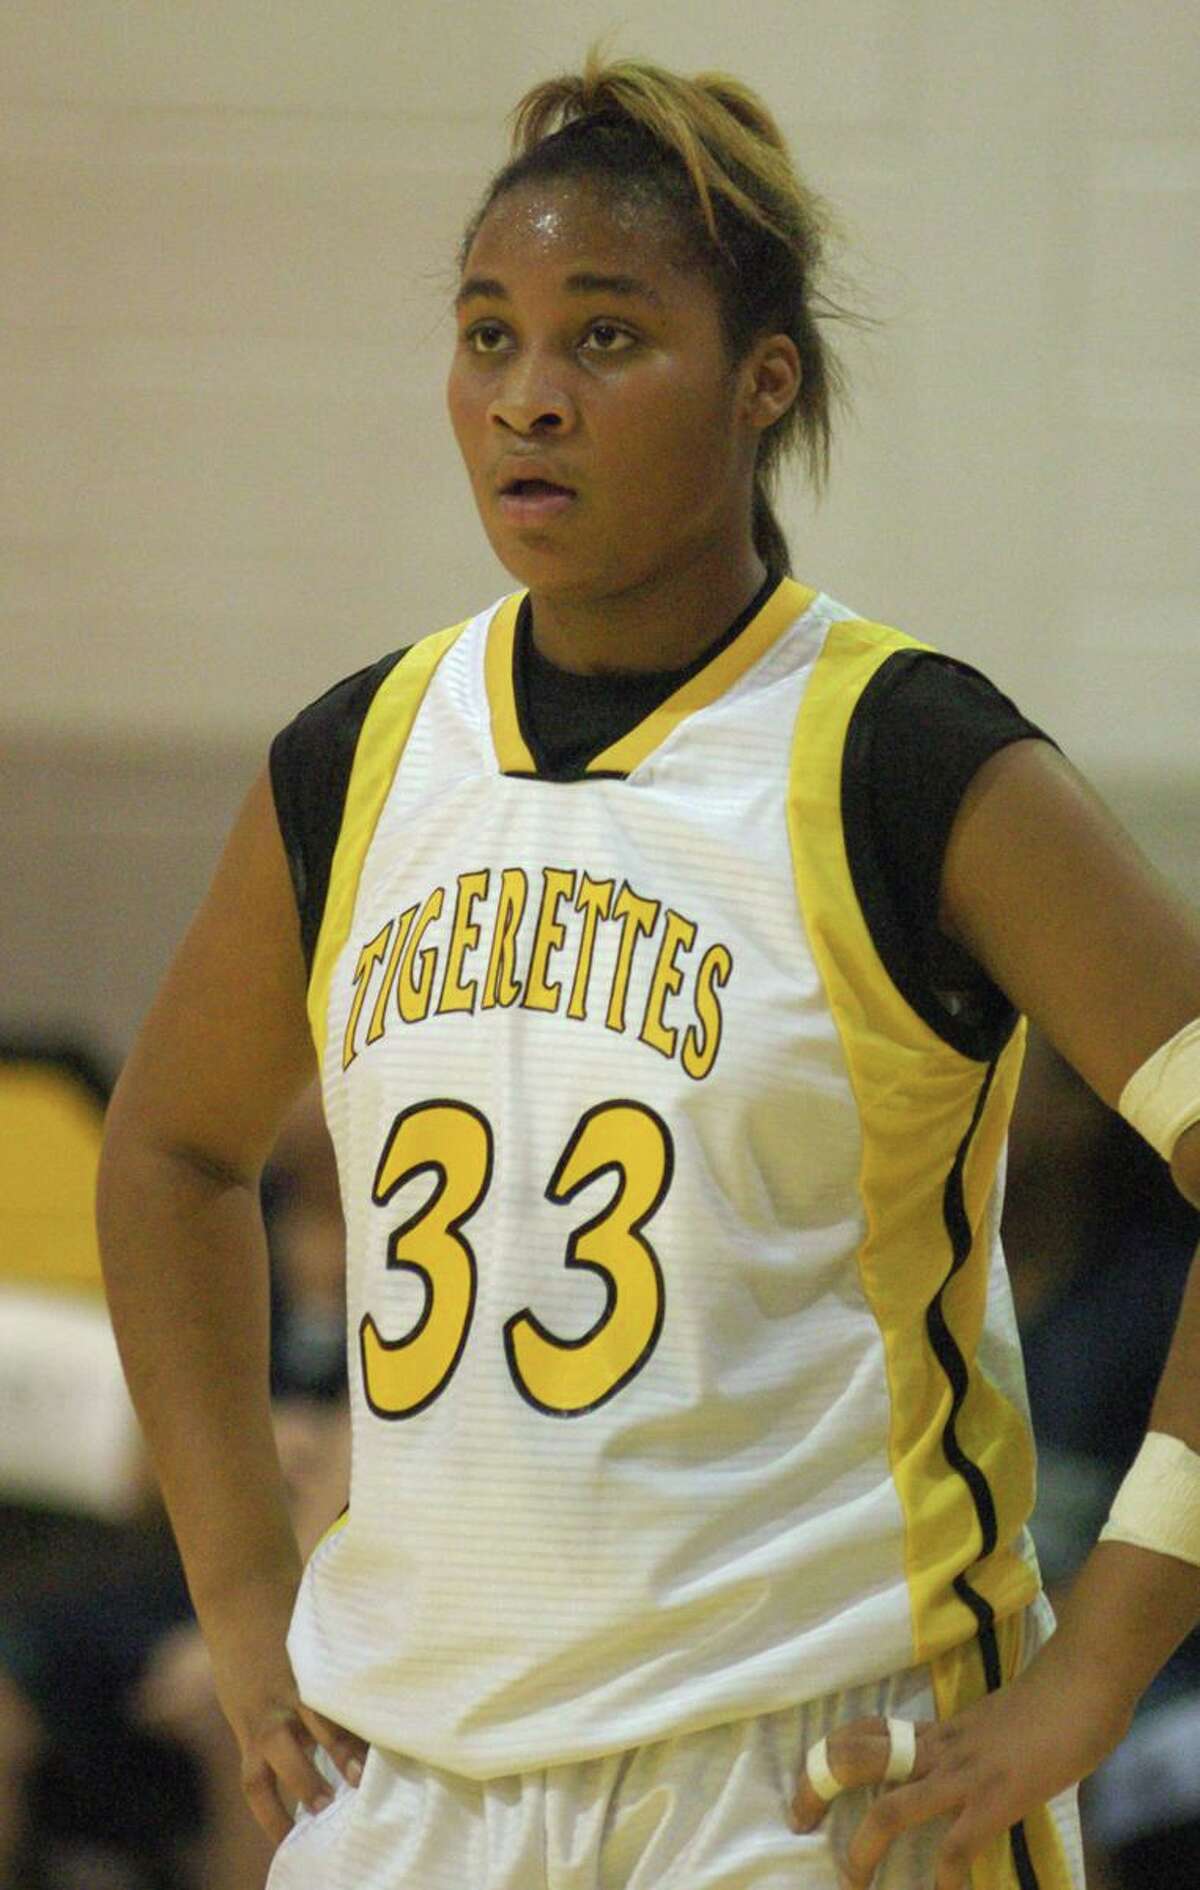 Conroe's Chanistie Smith, #33, waits for game to start. Teams playing in the Conroe's 58th Annual Varsity Girls Basketball Tournament.